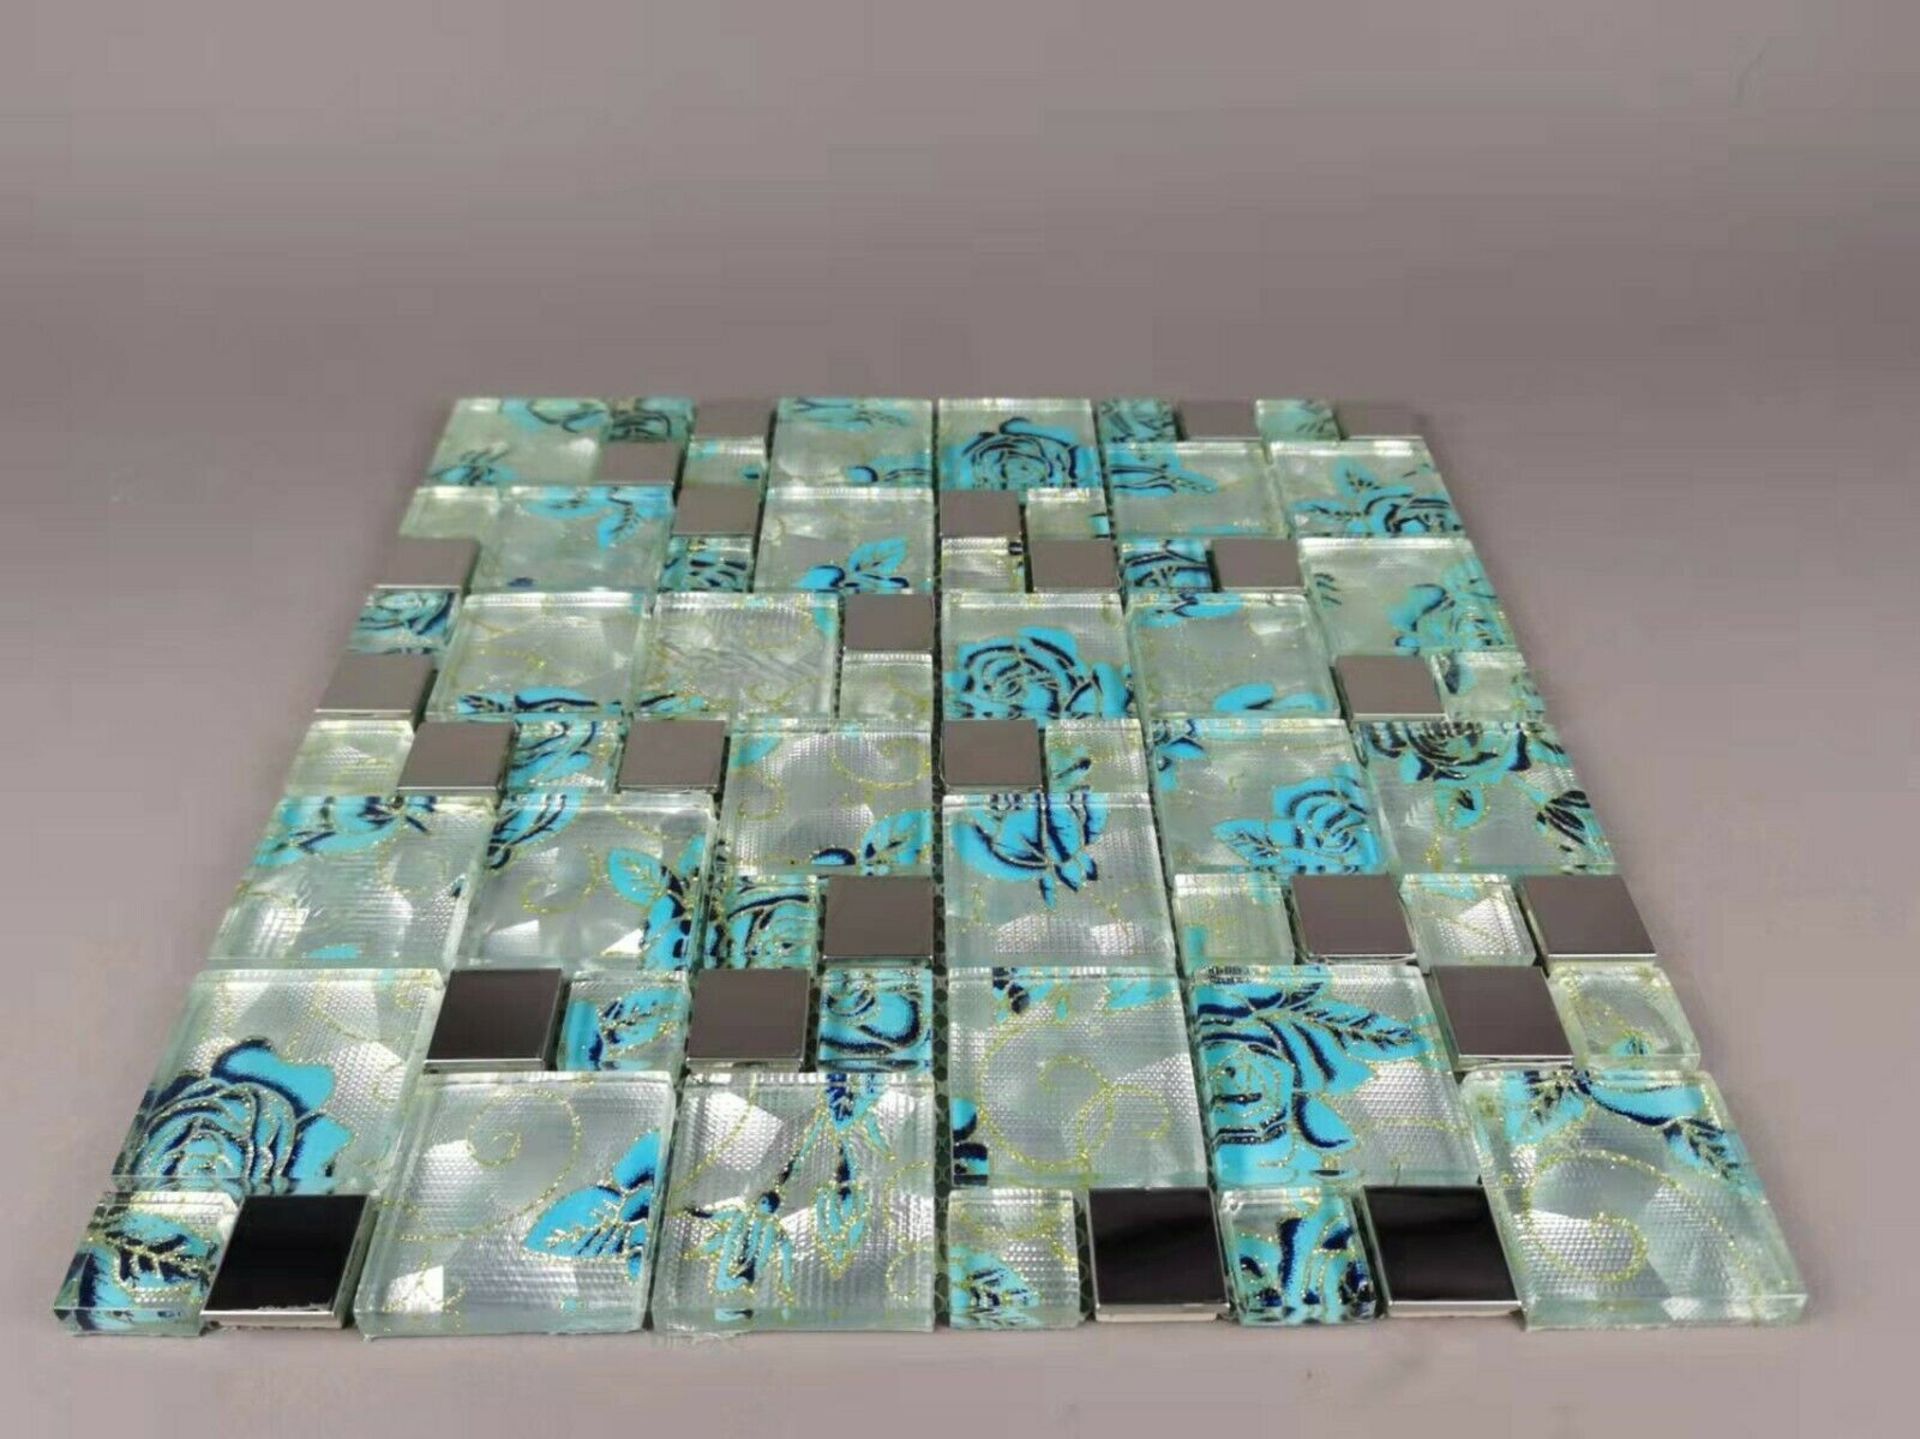 2 Square Metres - High Quality Glass/Stainless Steel Mosaic Tiles - Image 2 of 5